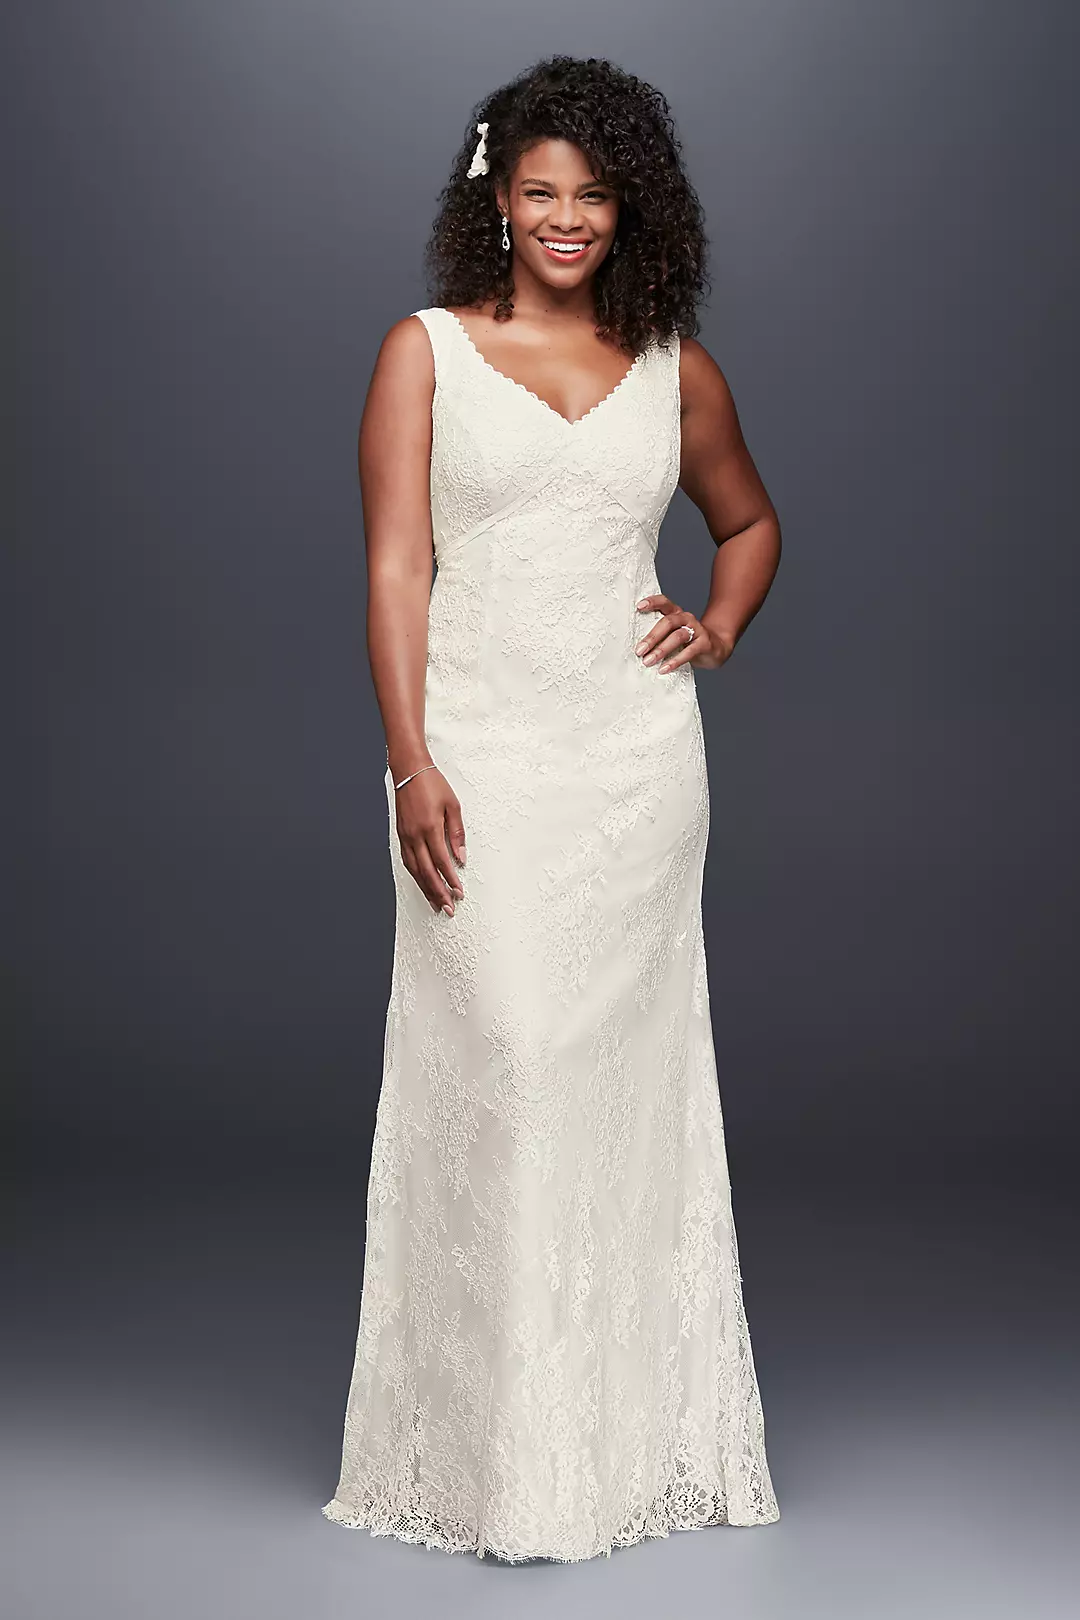 As-Is Plus Size Wedding Dress with Empire Waist Image